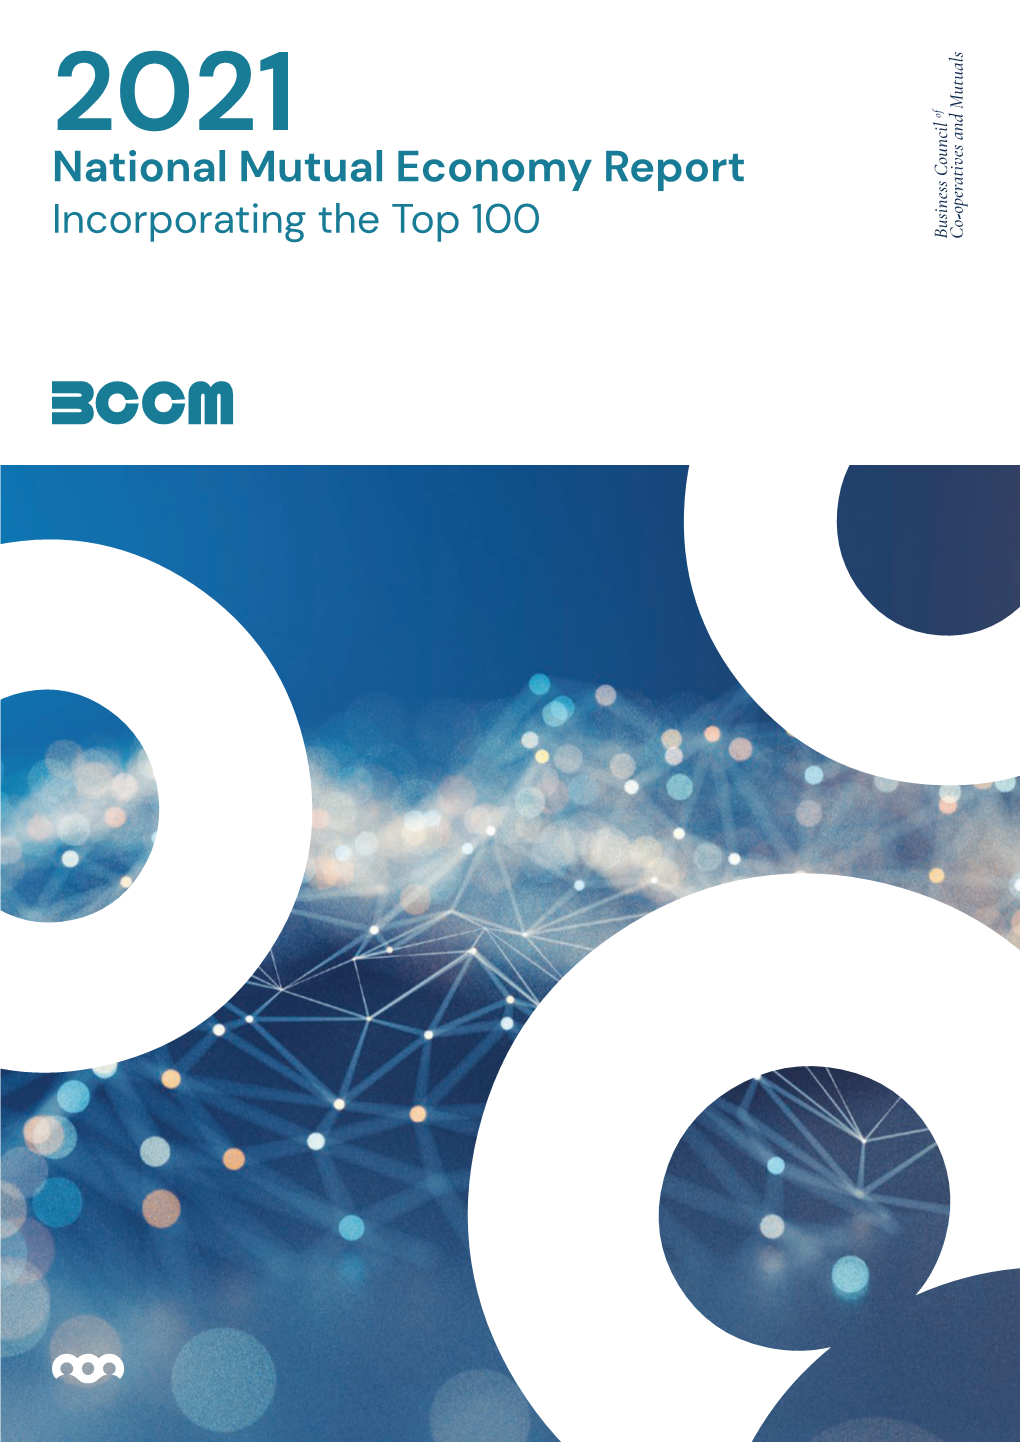 2021 National Mutual Economy Report Incorporating the Top 100